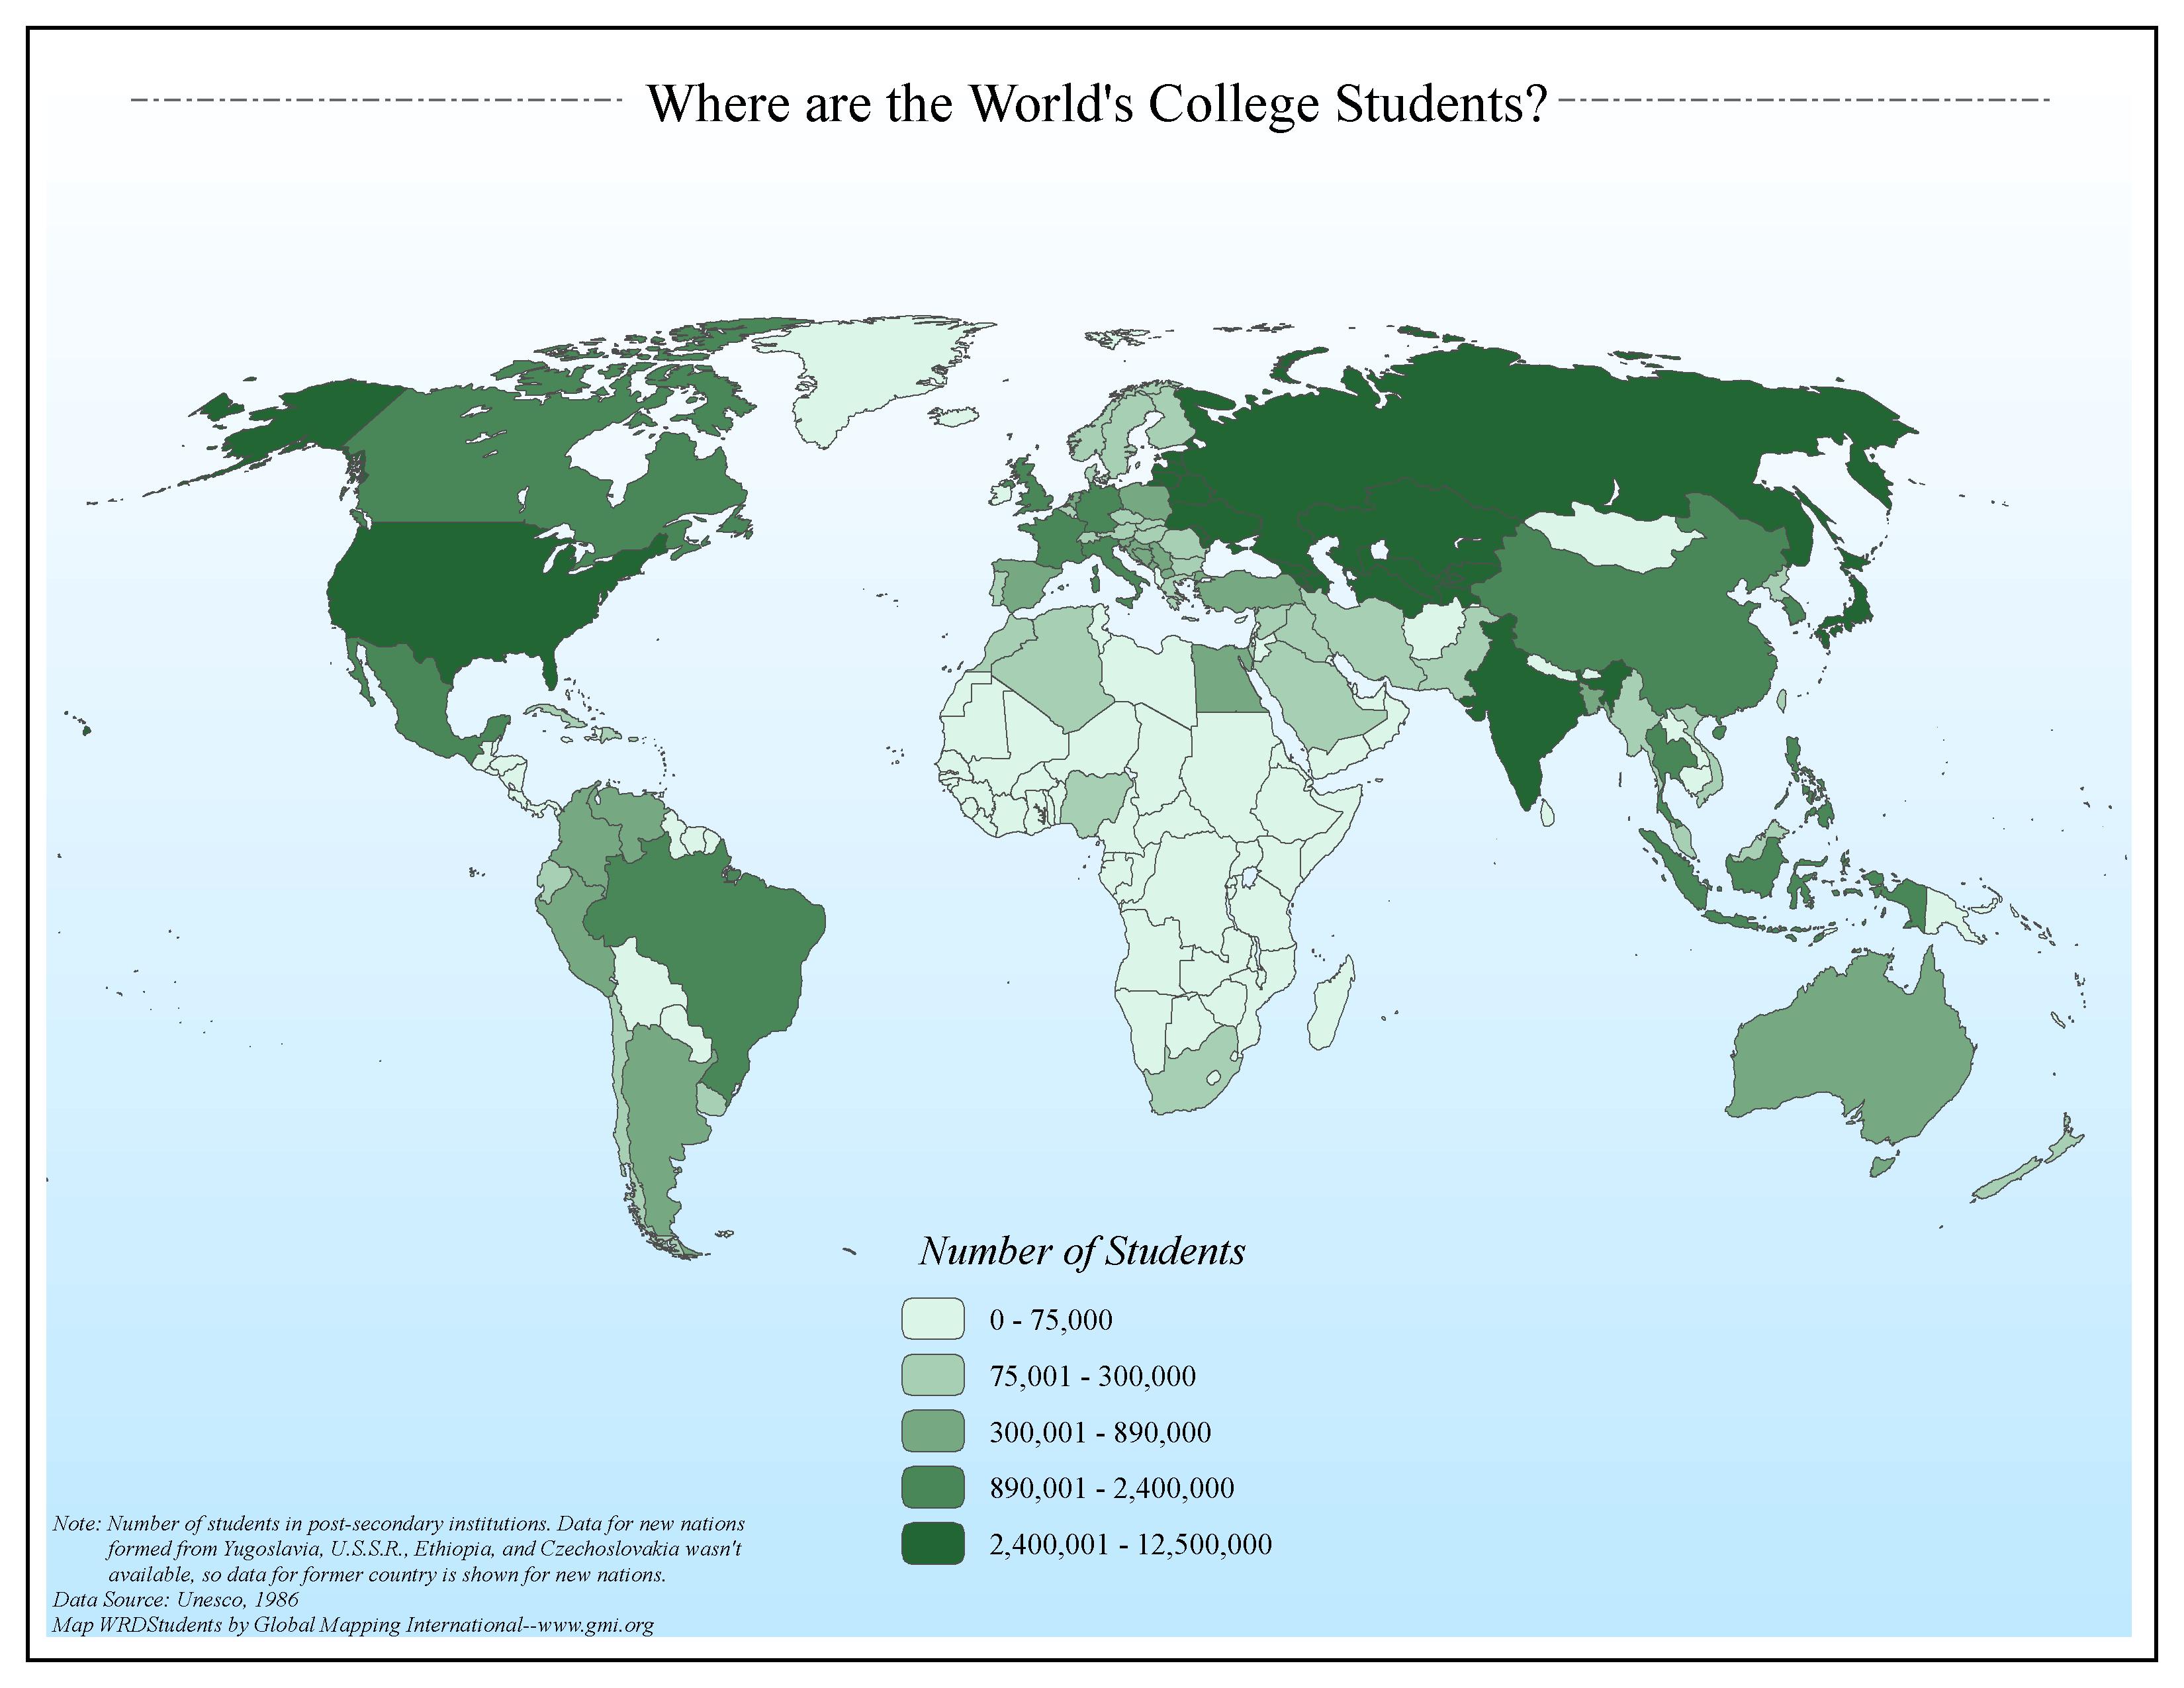 Where are the World's College Students?